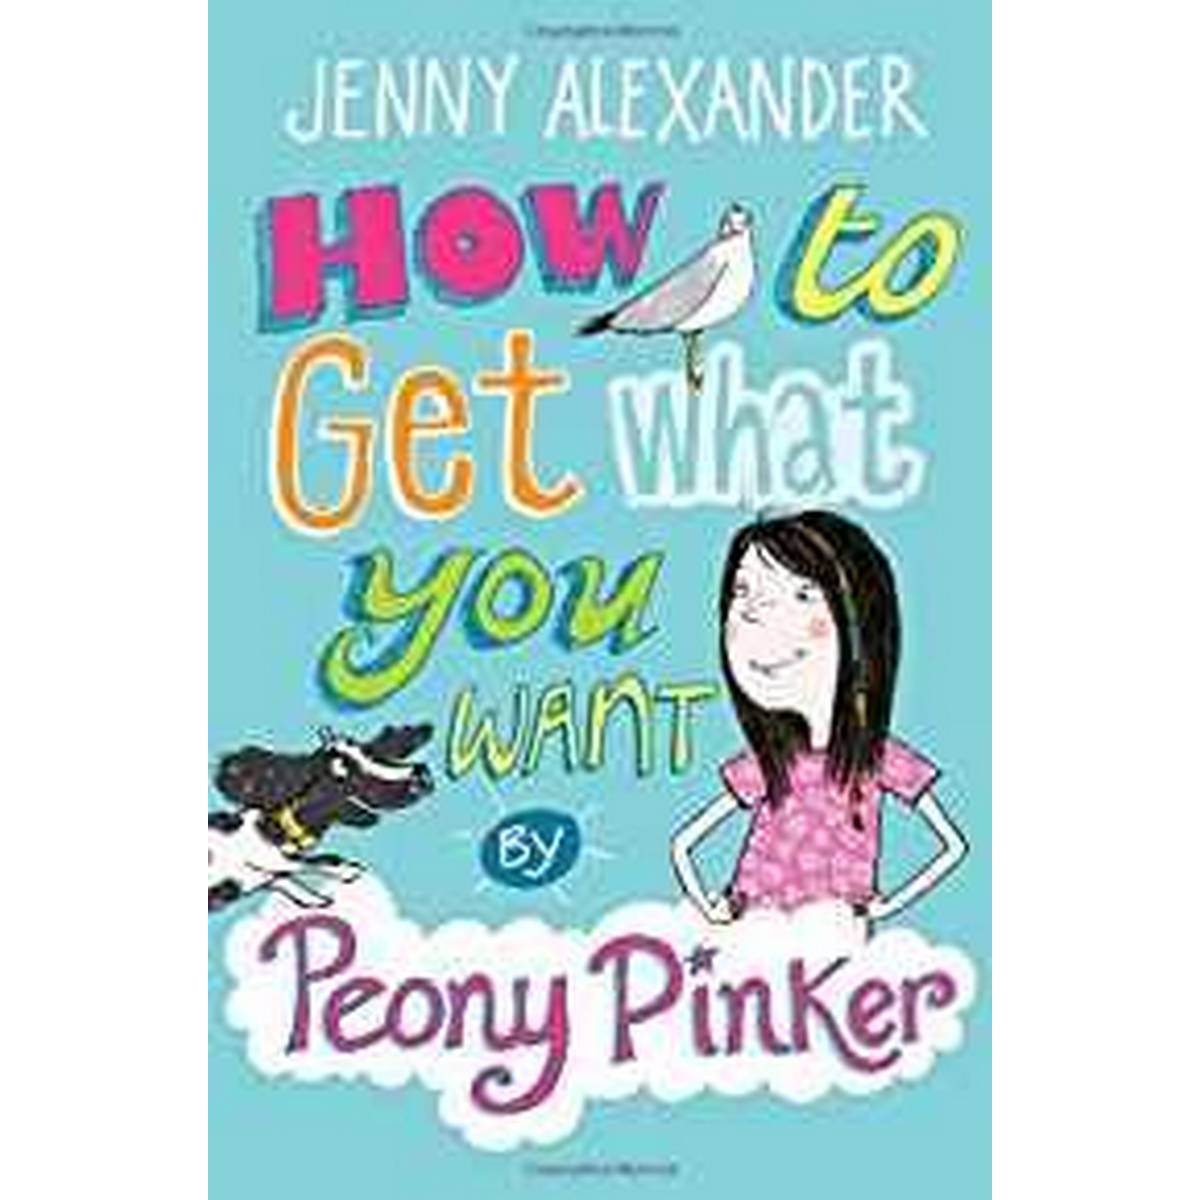 How to Get What You Want by Peony Pinker